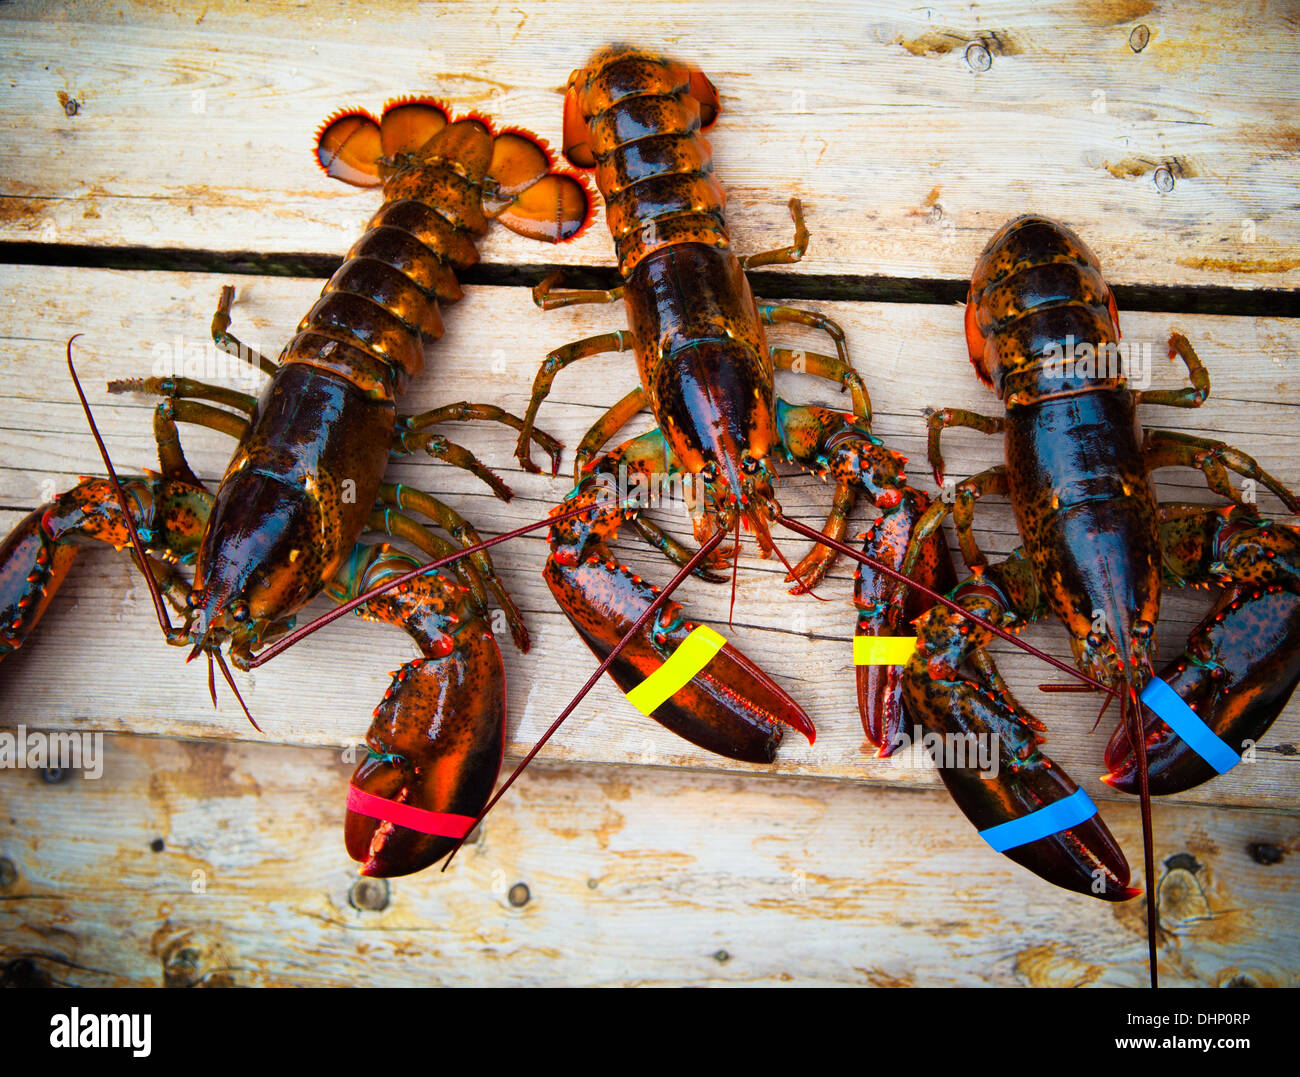 Three Maine lobsters alive on a wooden deck Stock Photo